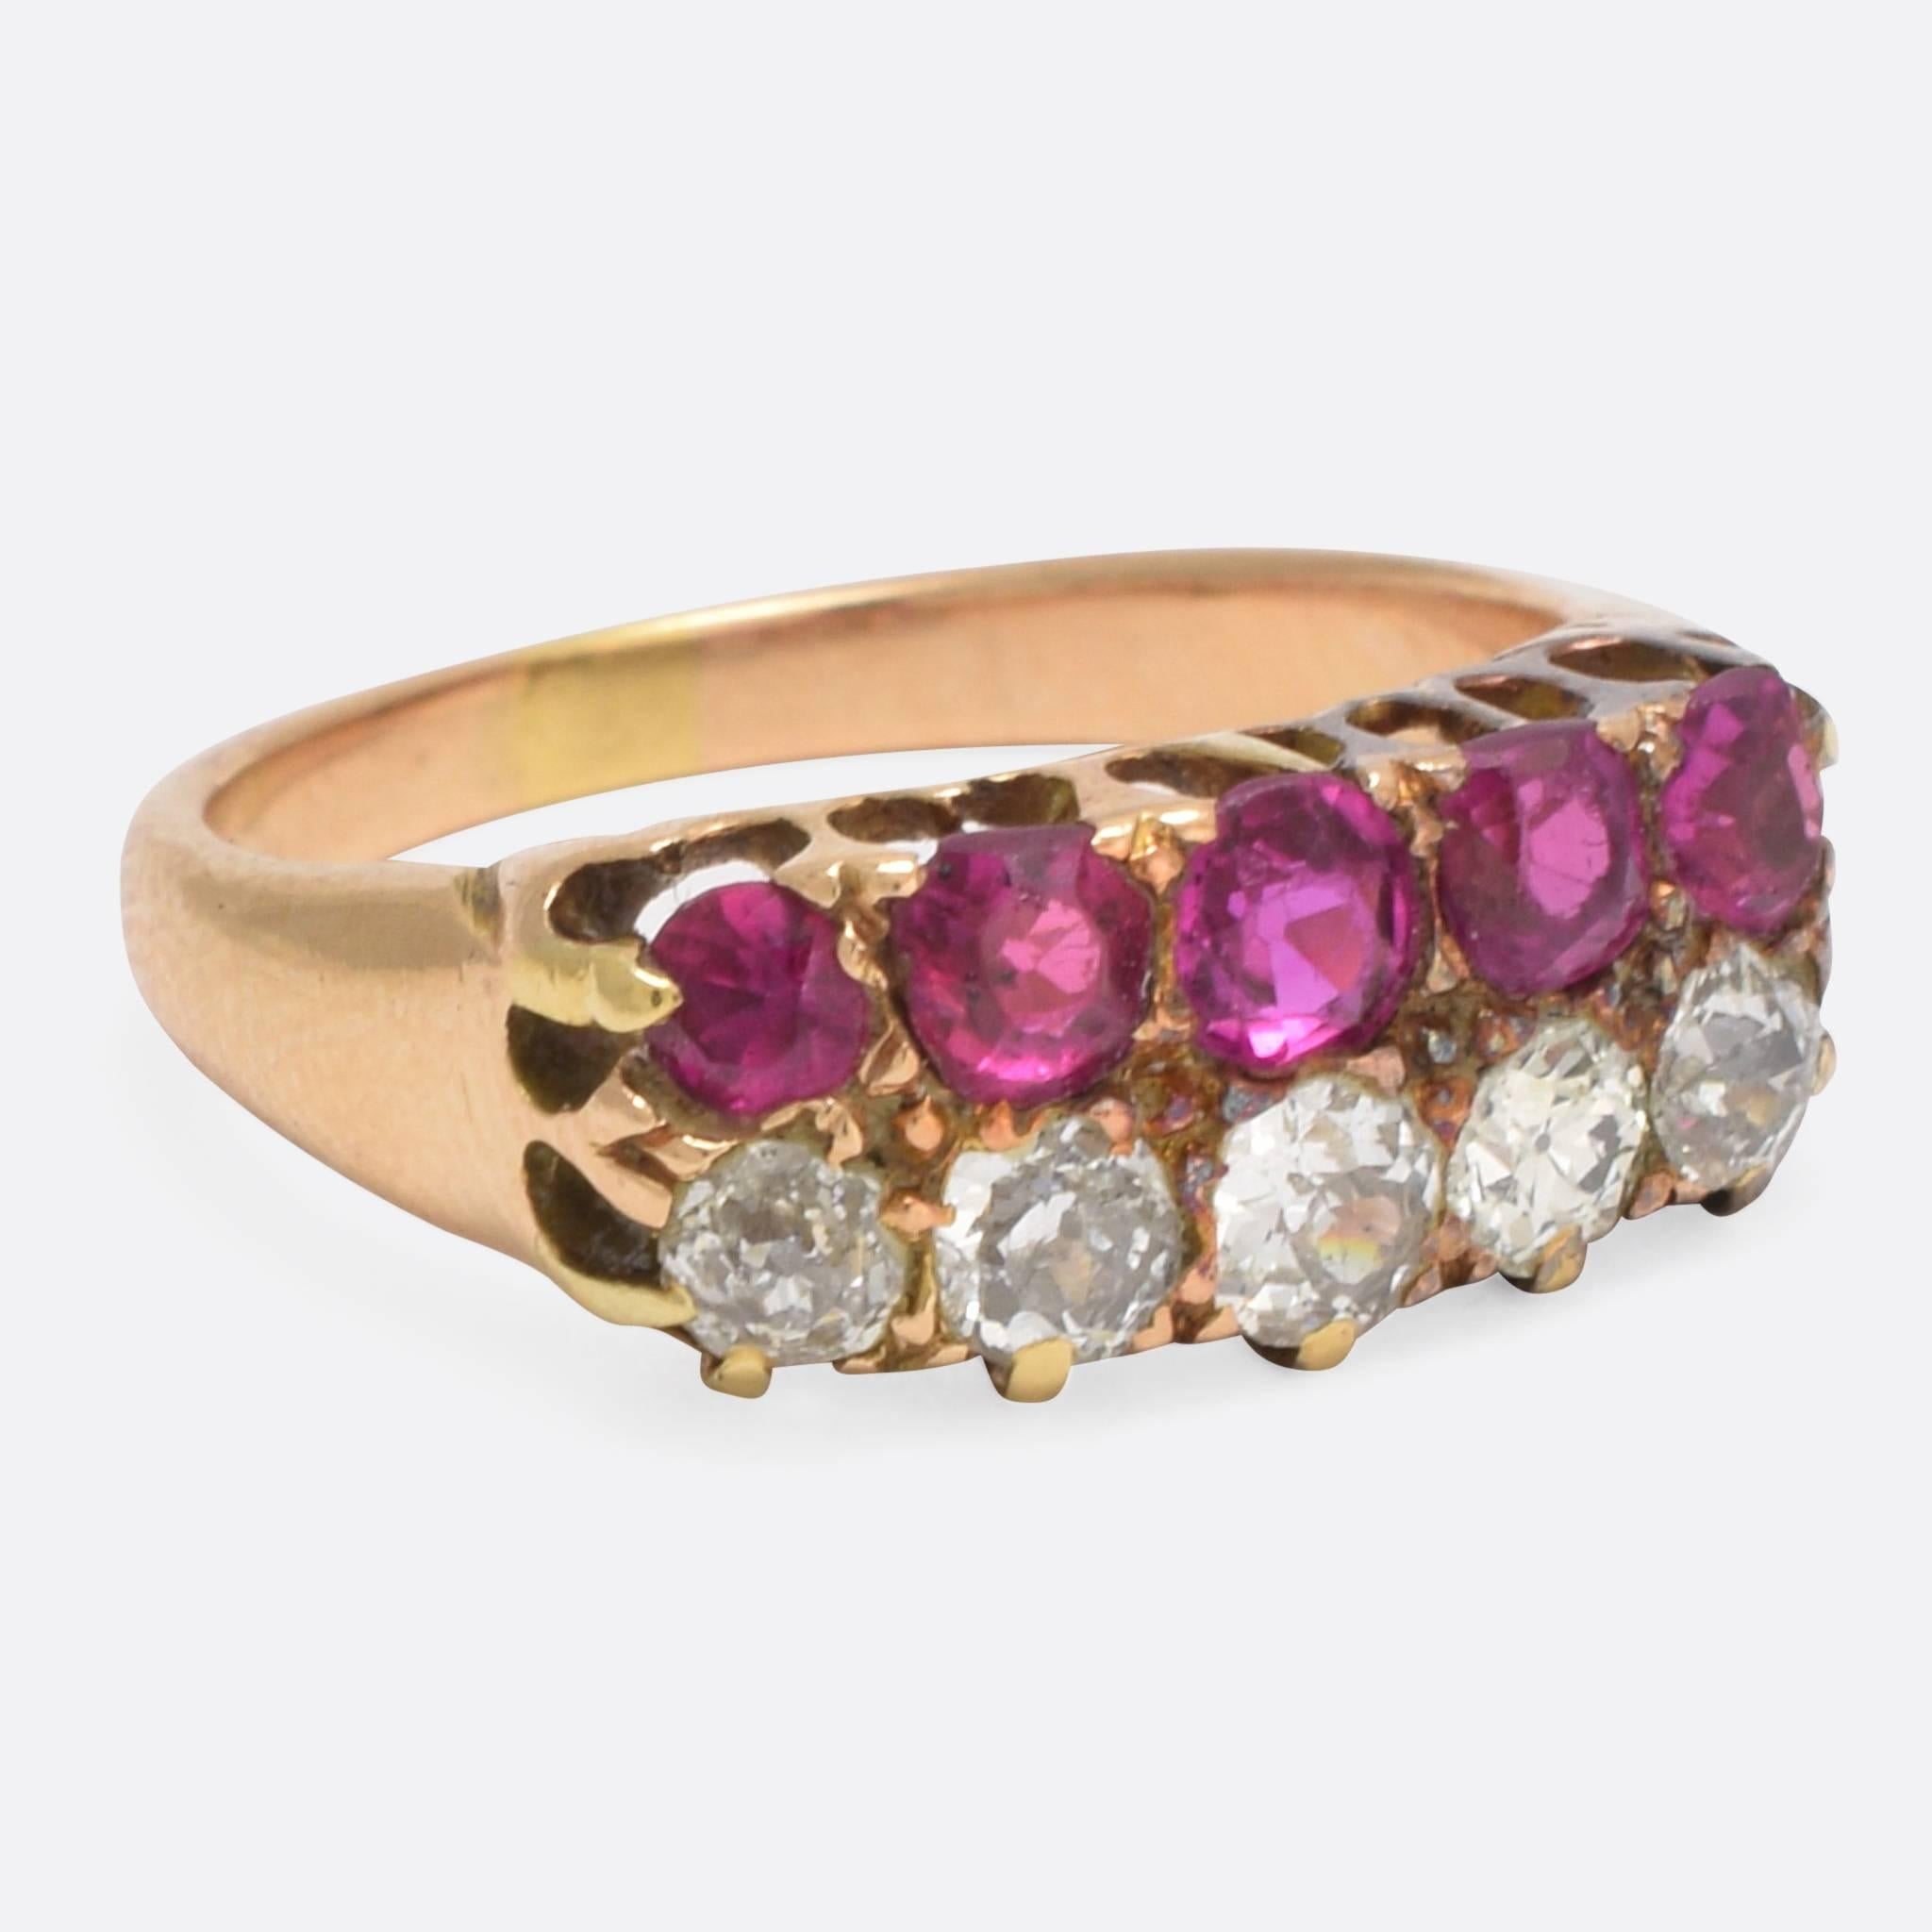 This splendid antique ring is set with two rows of gems: one ruby, one diamond. Modelled in 18k gold, the stones are set in elongated claw mounts with spaces behind that let light illuminate the stones. An elegant and timeless piece with a total